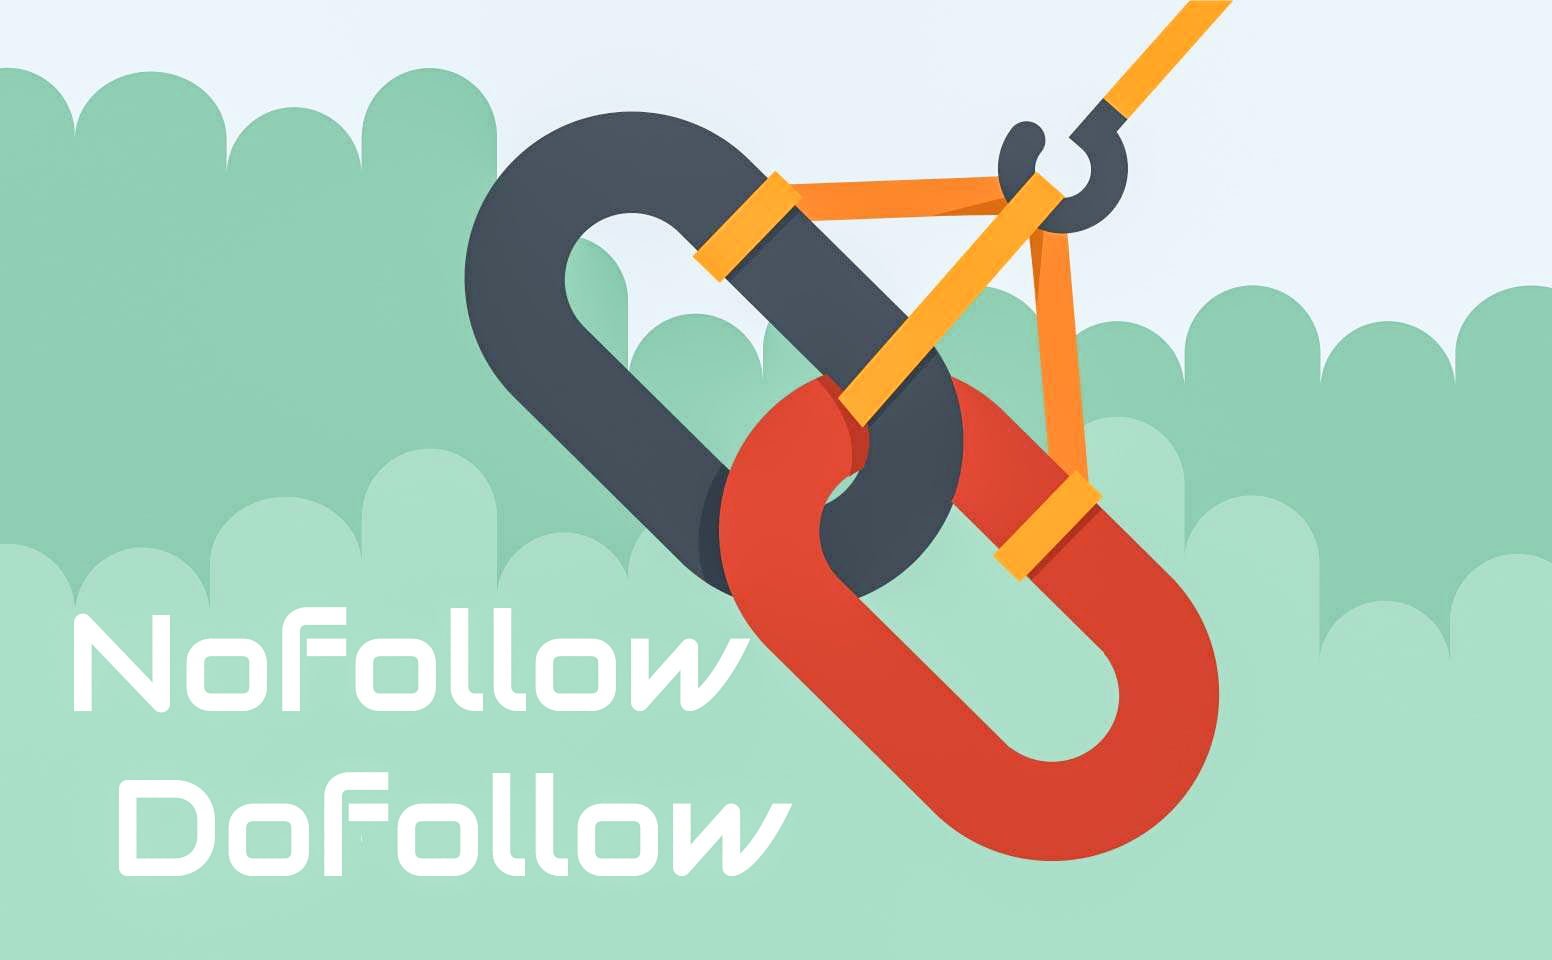 Nofollow vs Dofollow: What Are The Differences?